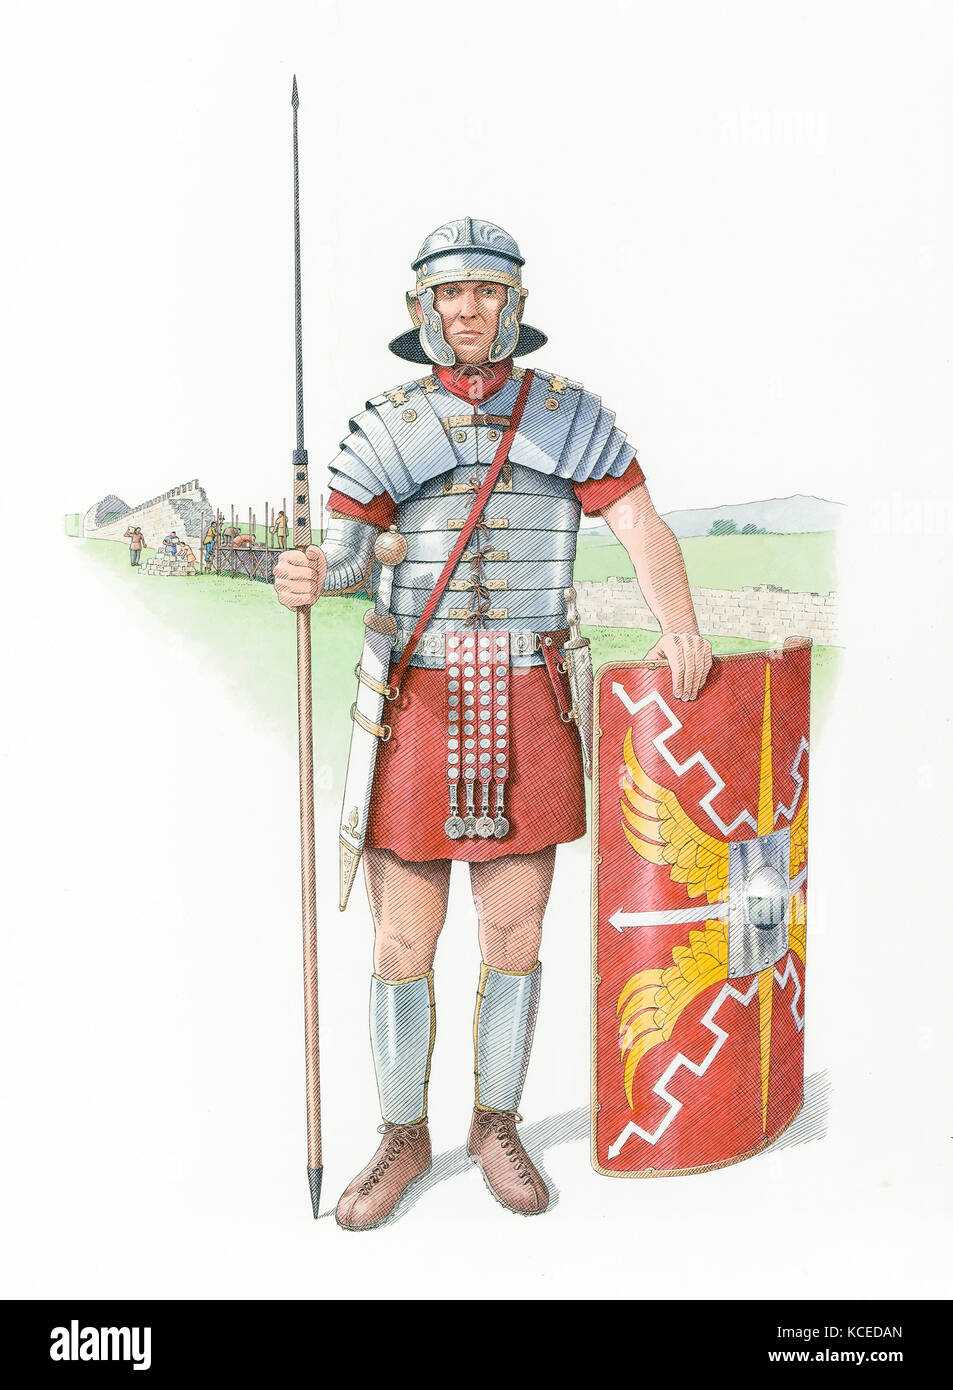 Hadrians wall roman soldier Cut Out Stock Images & Pictures - Alamy